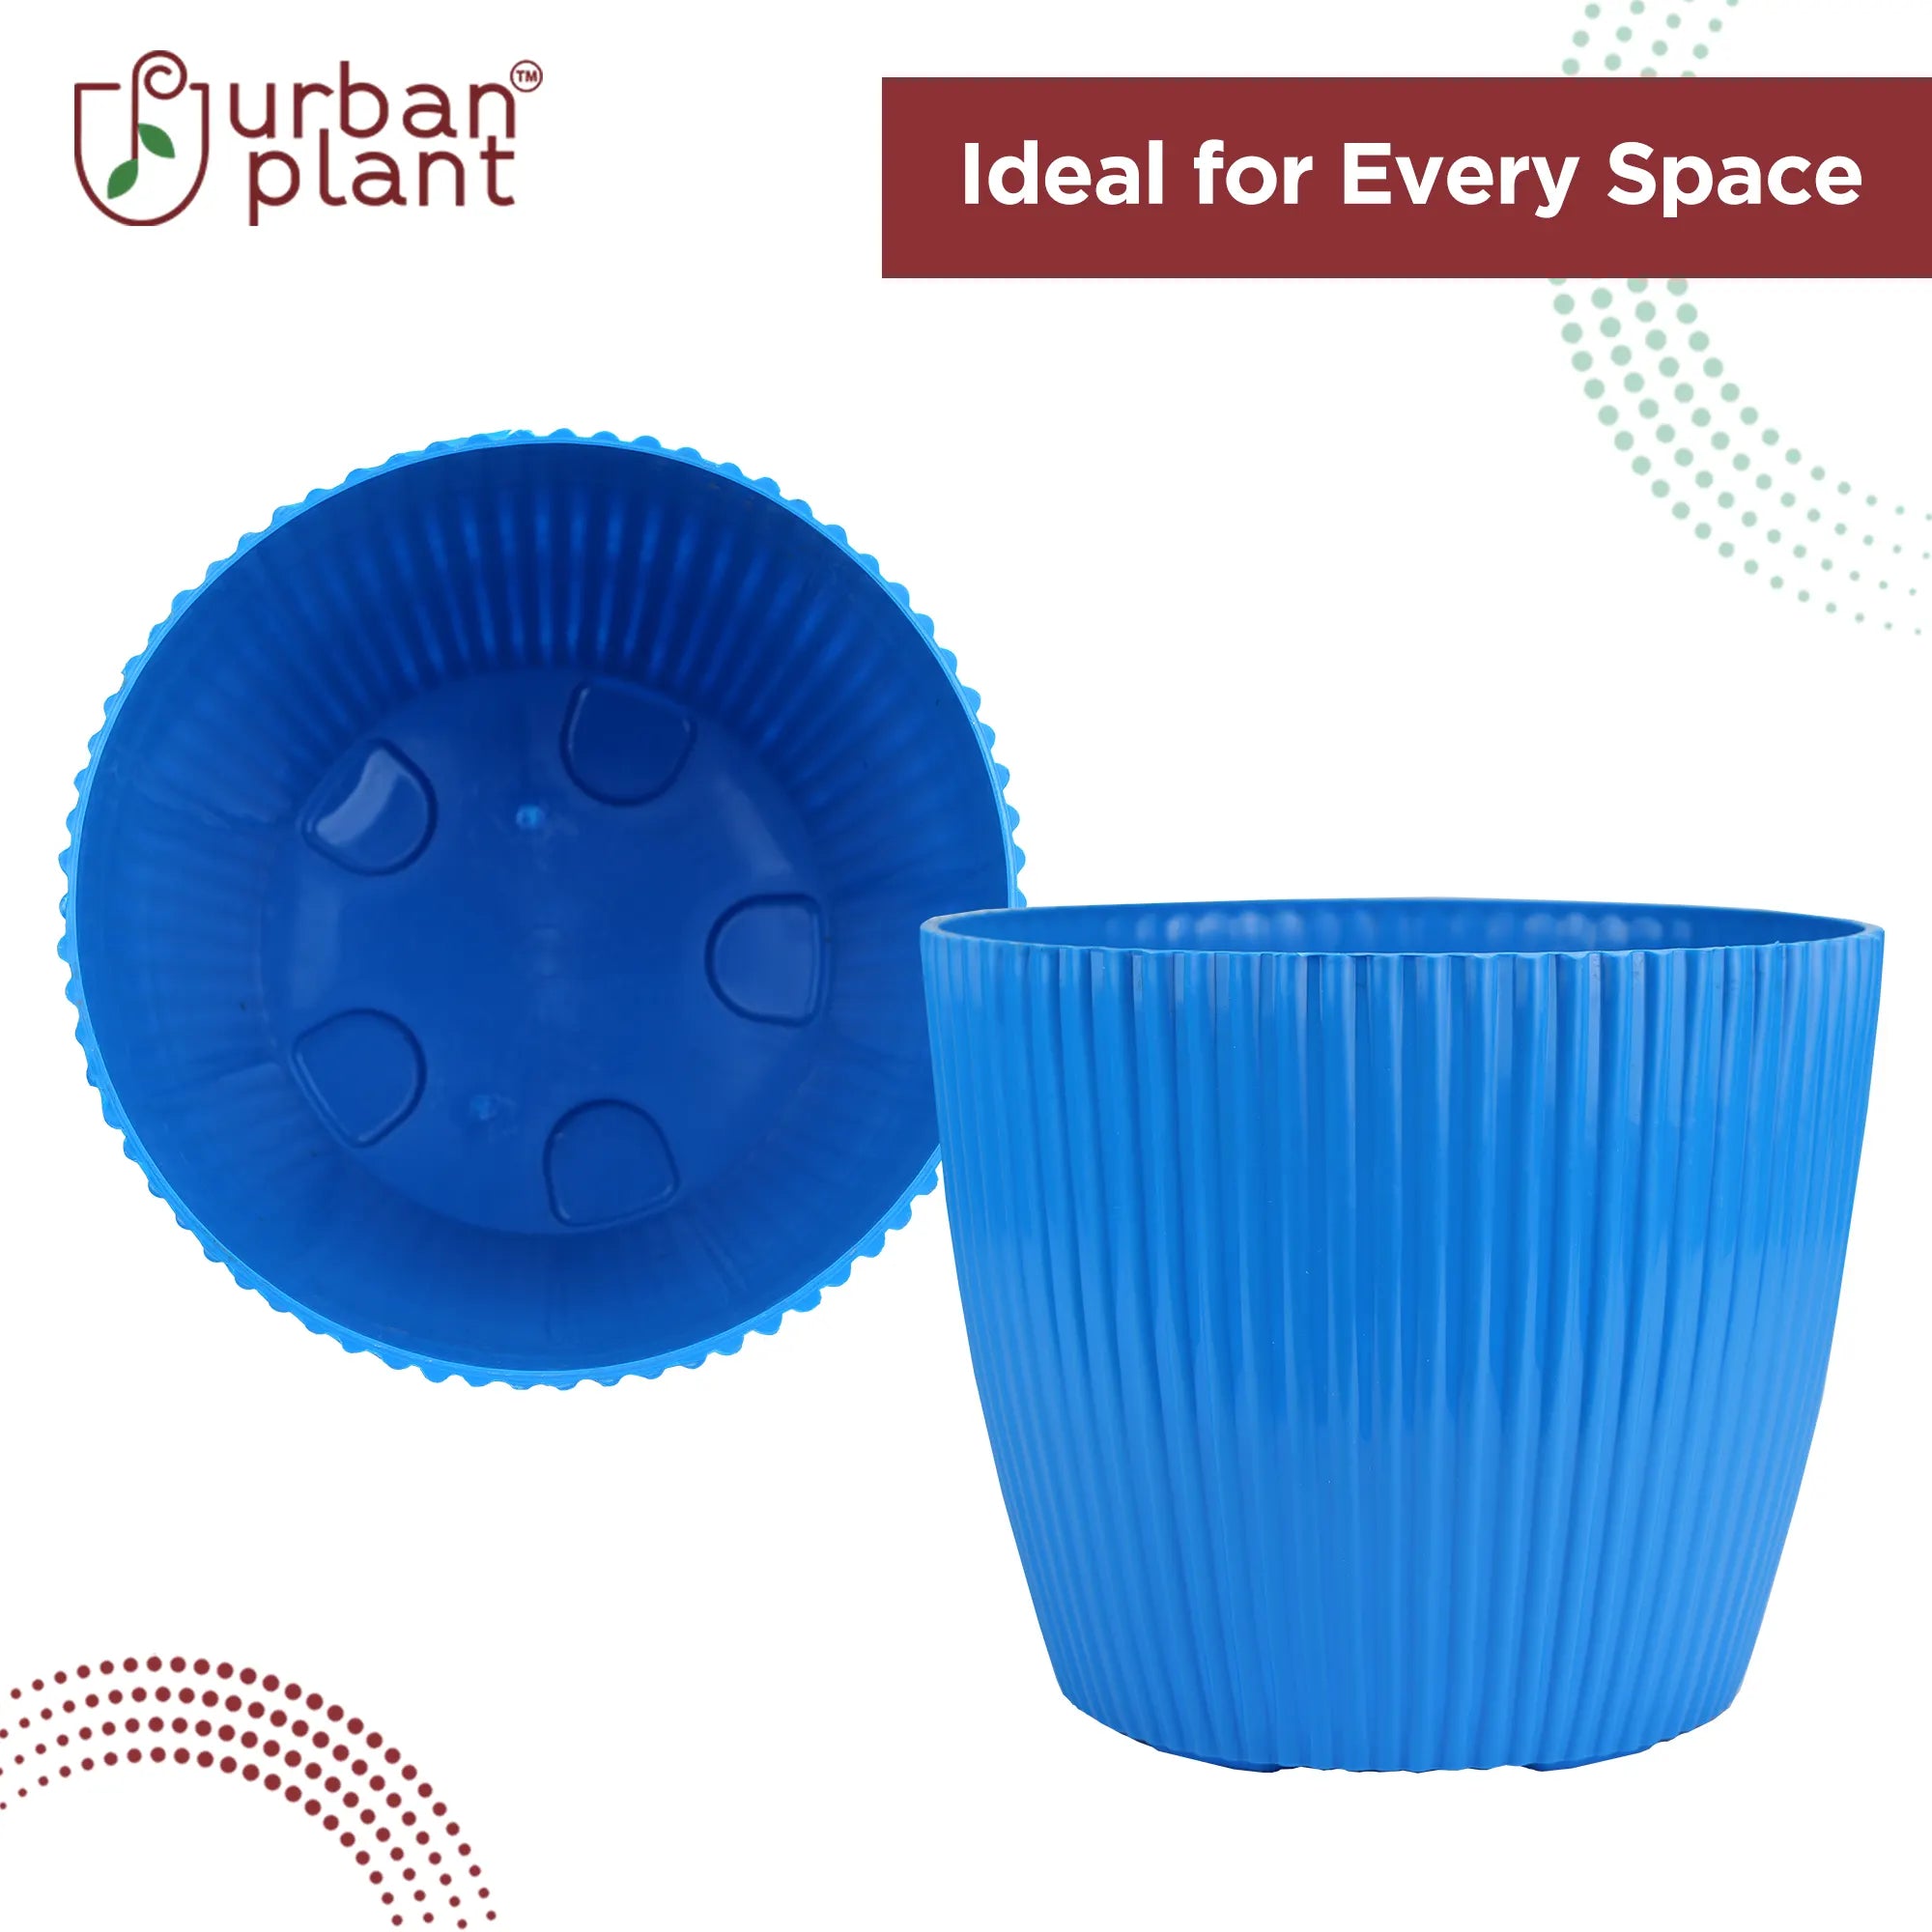 Decorative Round Shape Versatile 9-inch Plastic Pots in Blue, White, and Yellow Urban Plant 